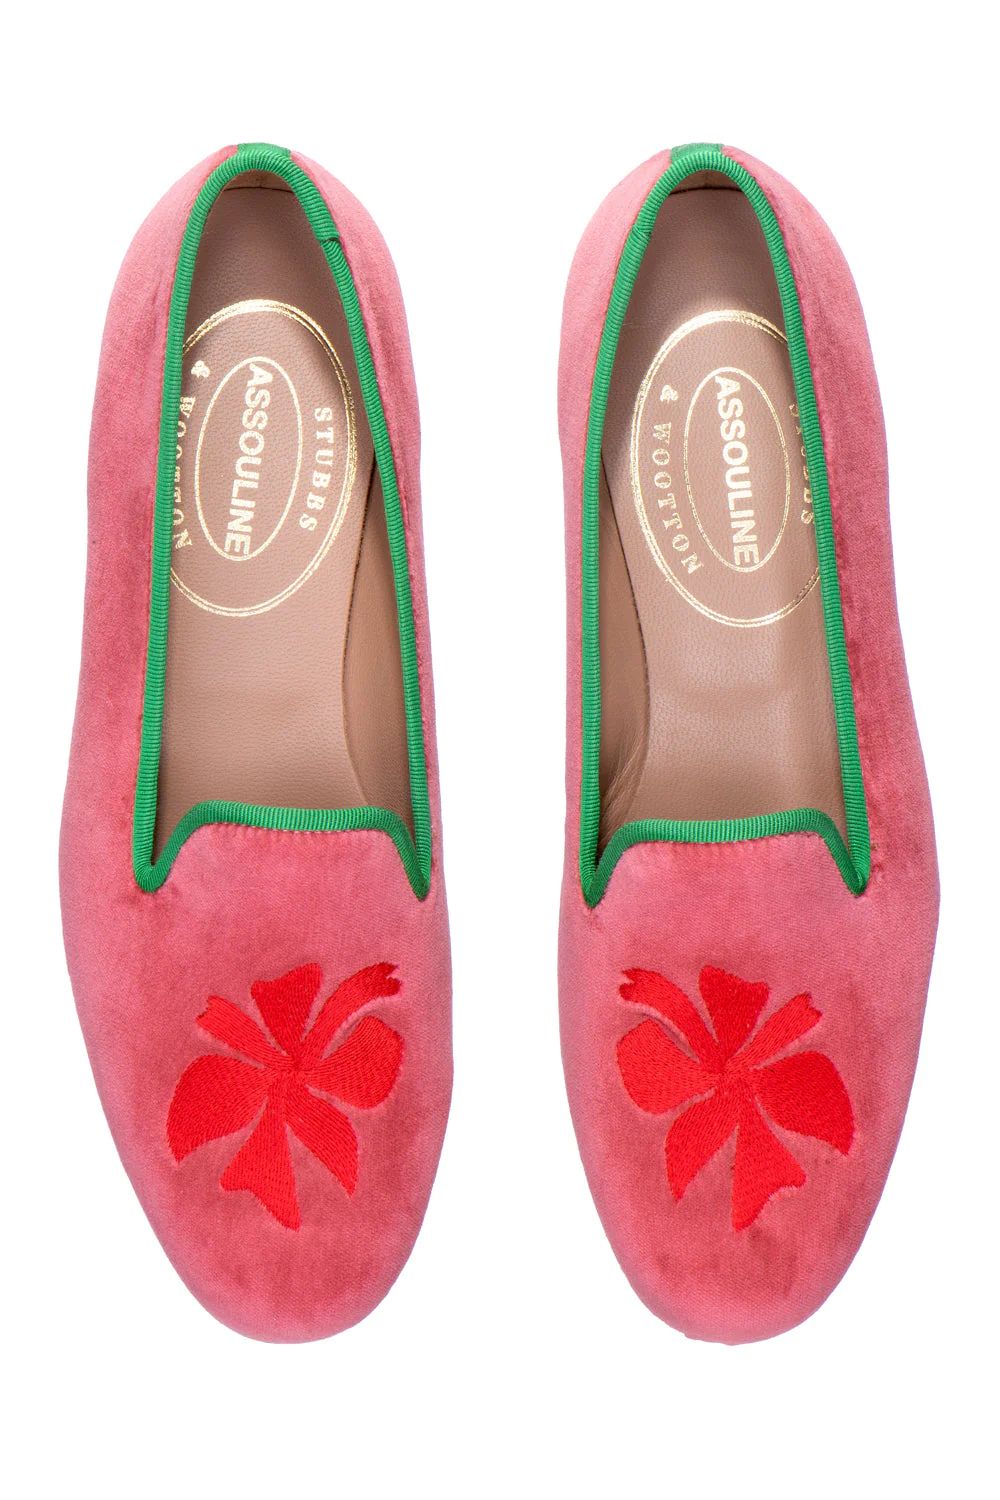 Assouline Palm Beach Slipper in Pink | Over The Moon